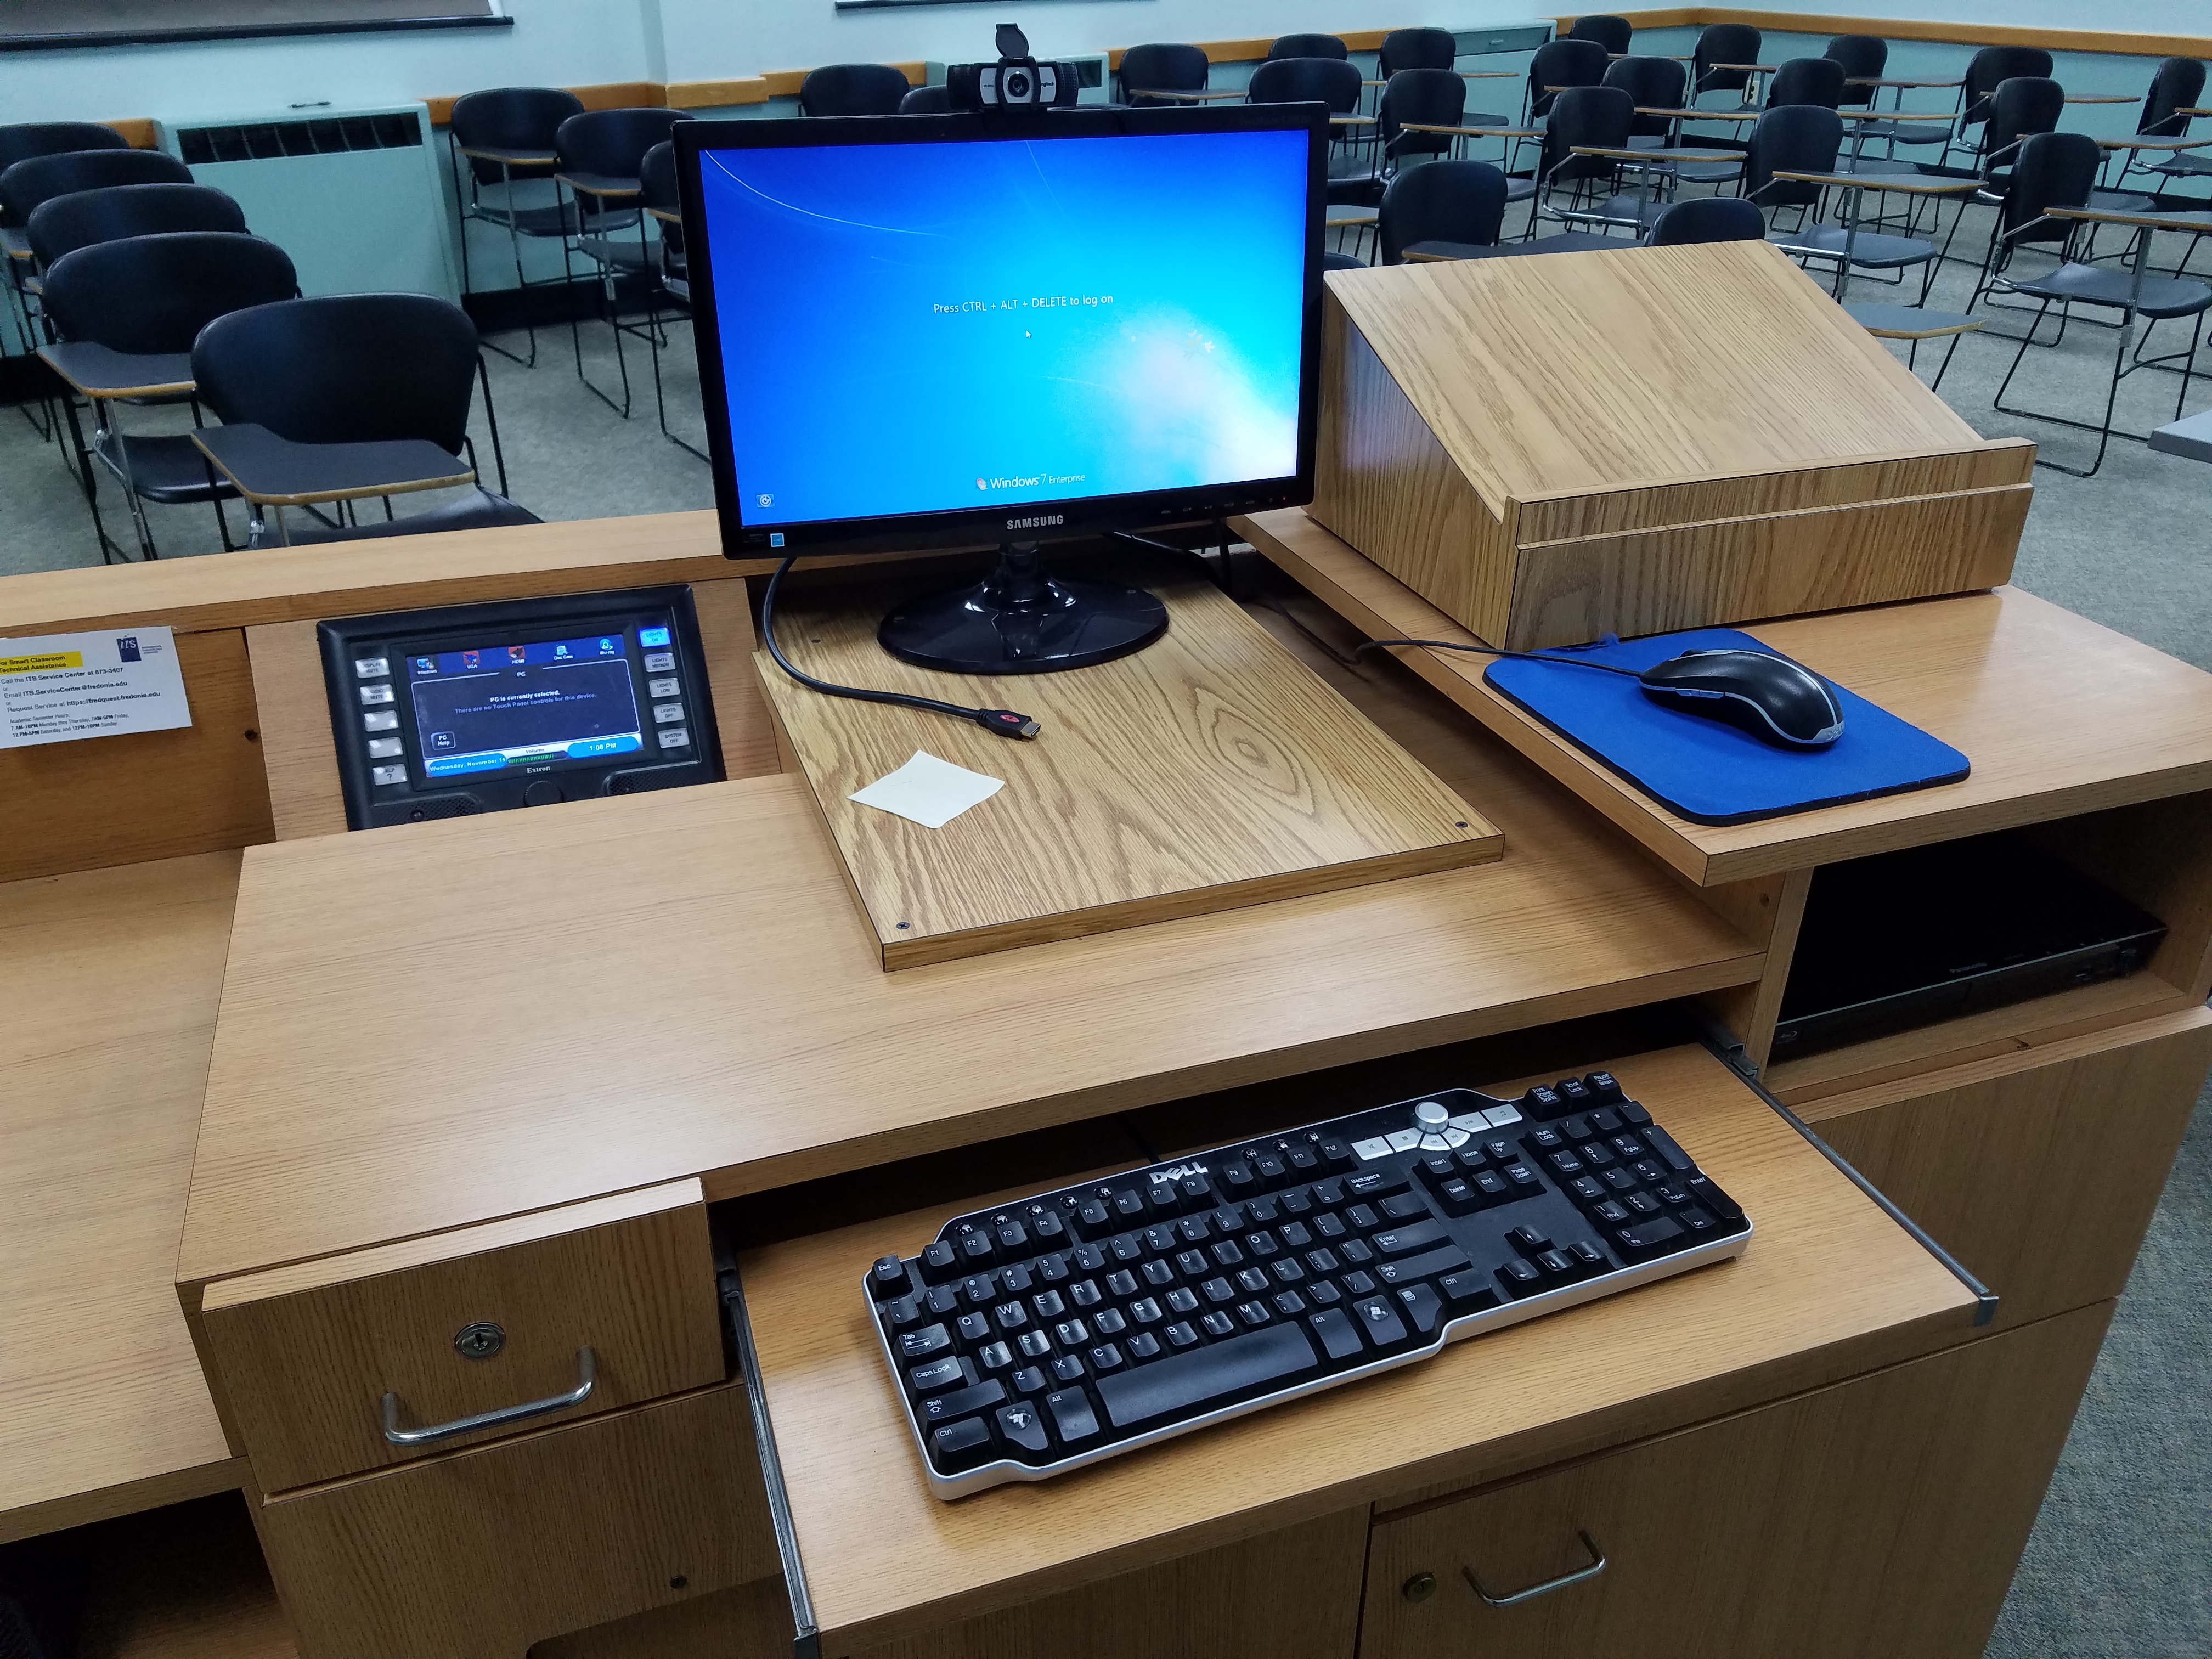 Teachers desk set up with a computer monitor and keyboard.